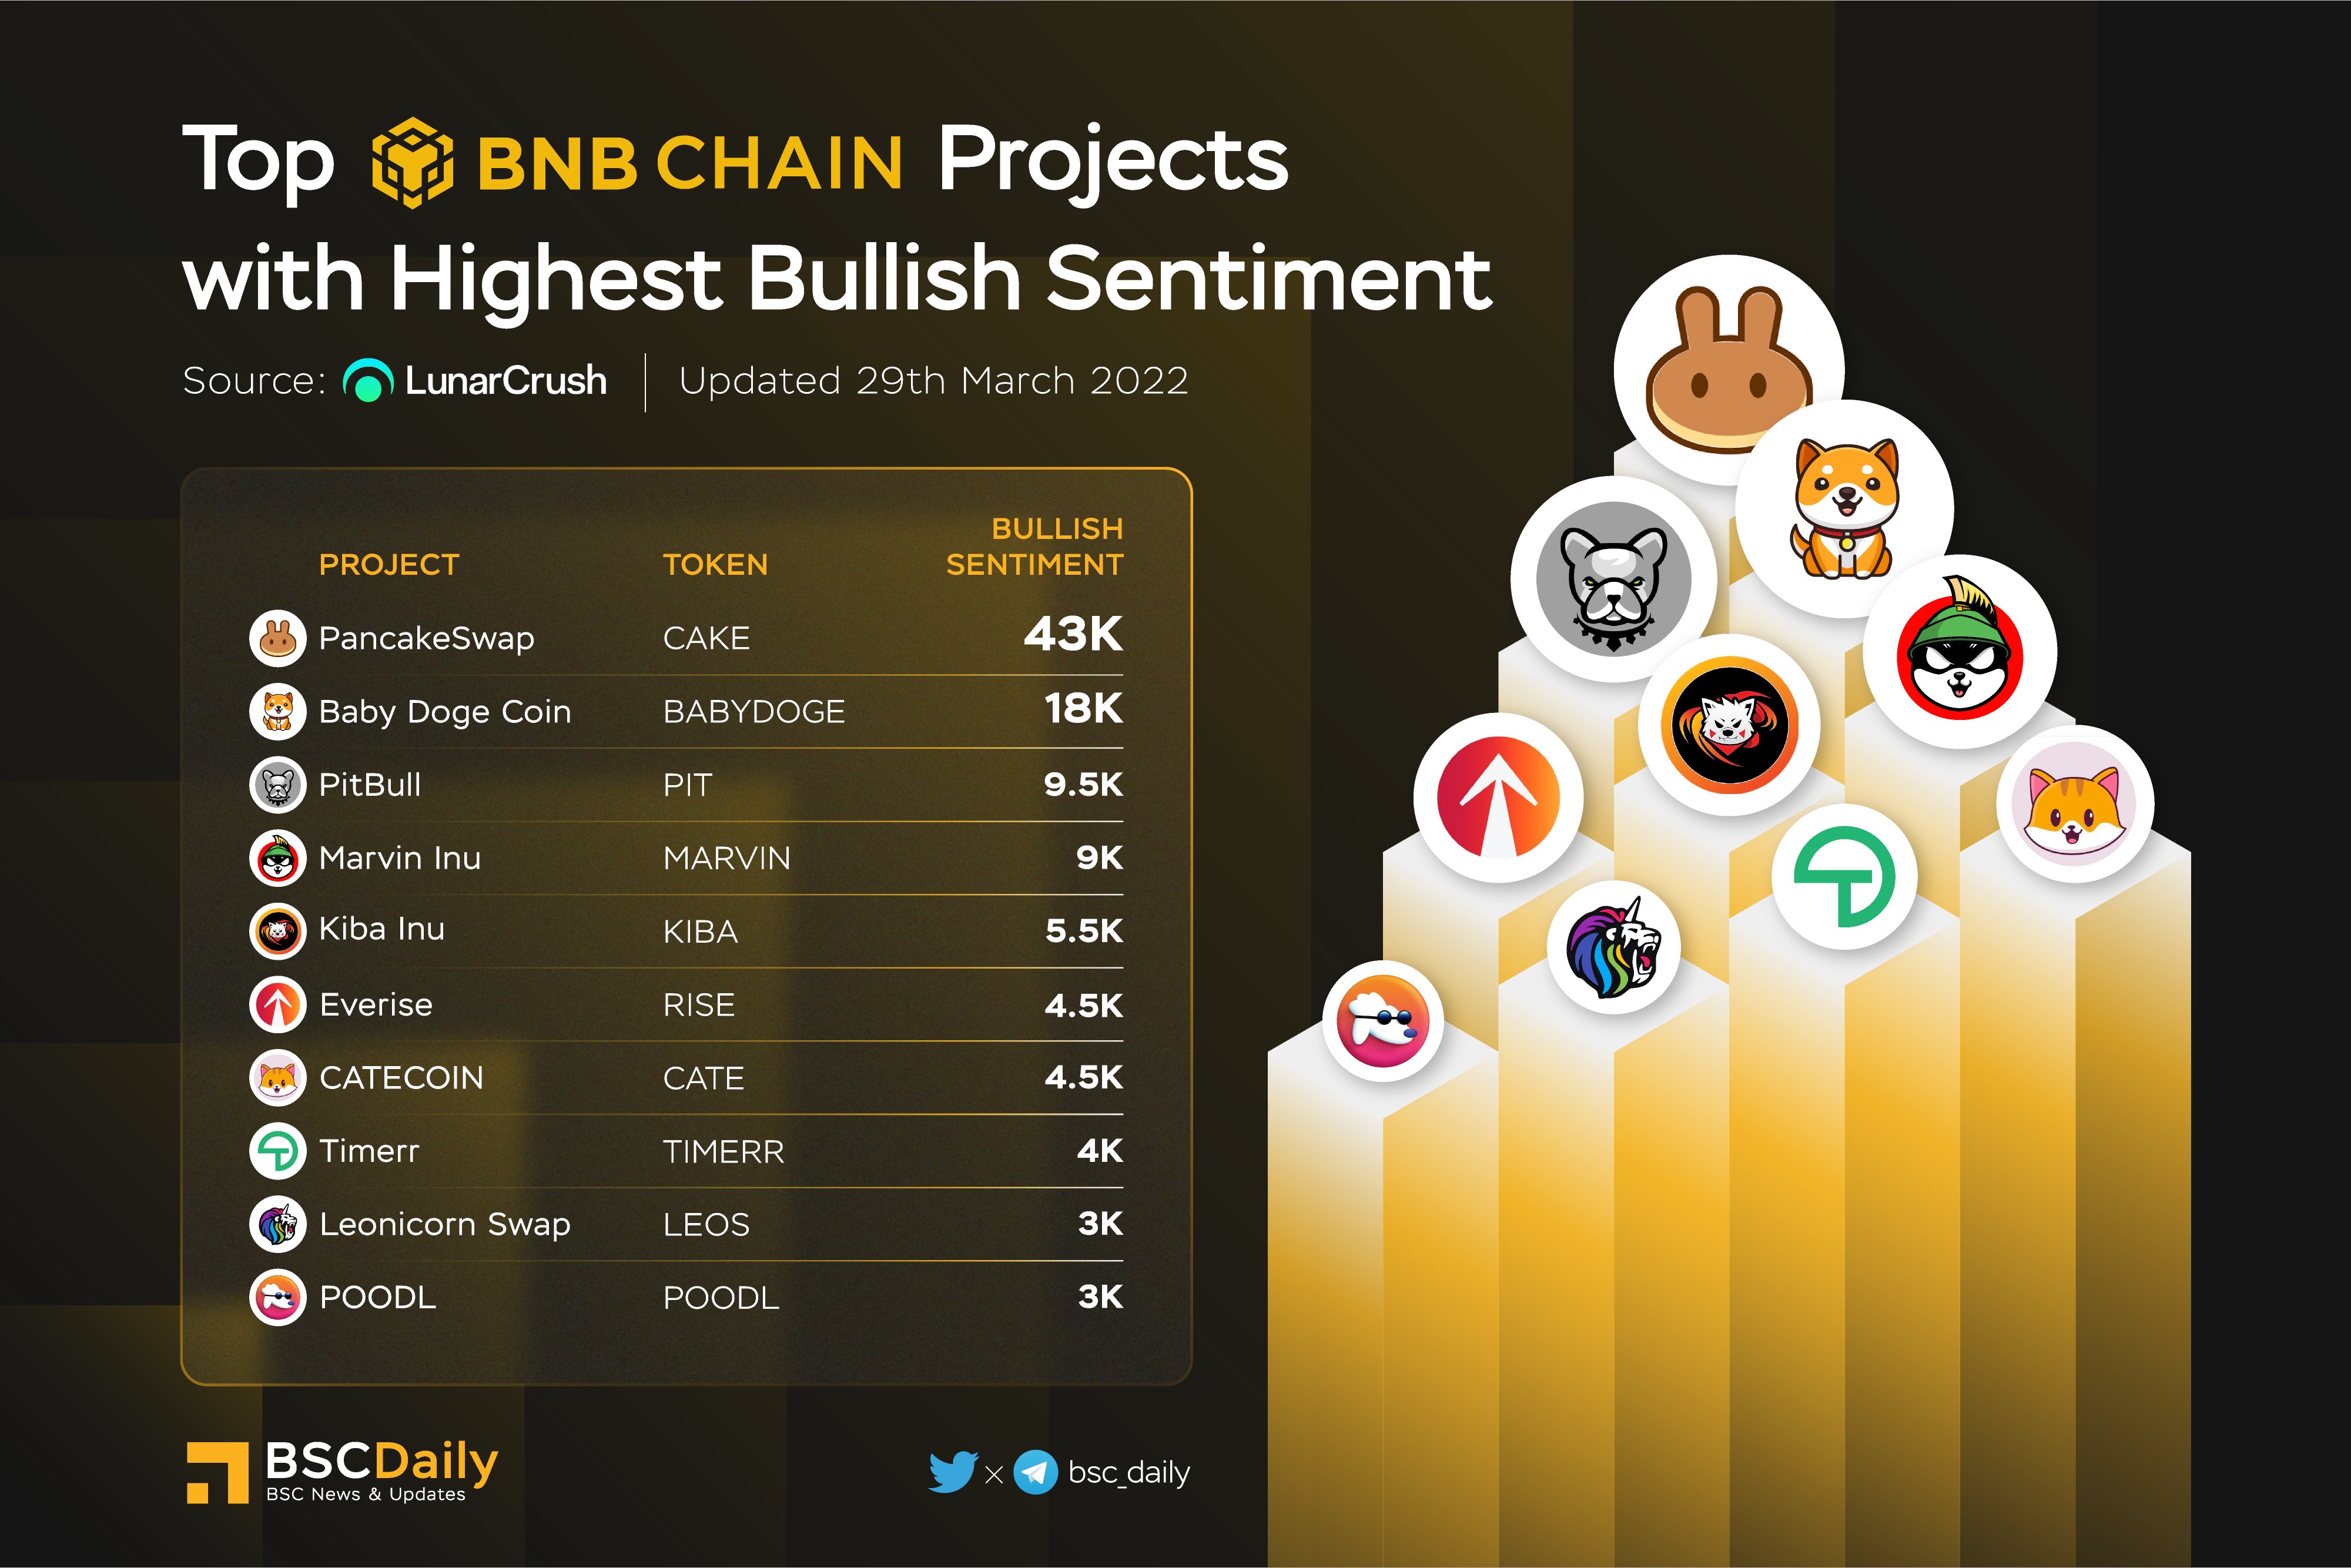 TOP BNBCHAIN PROJECTS WITH HIGHEST BULLISH SENTIMENT